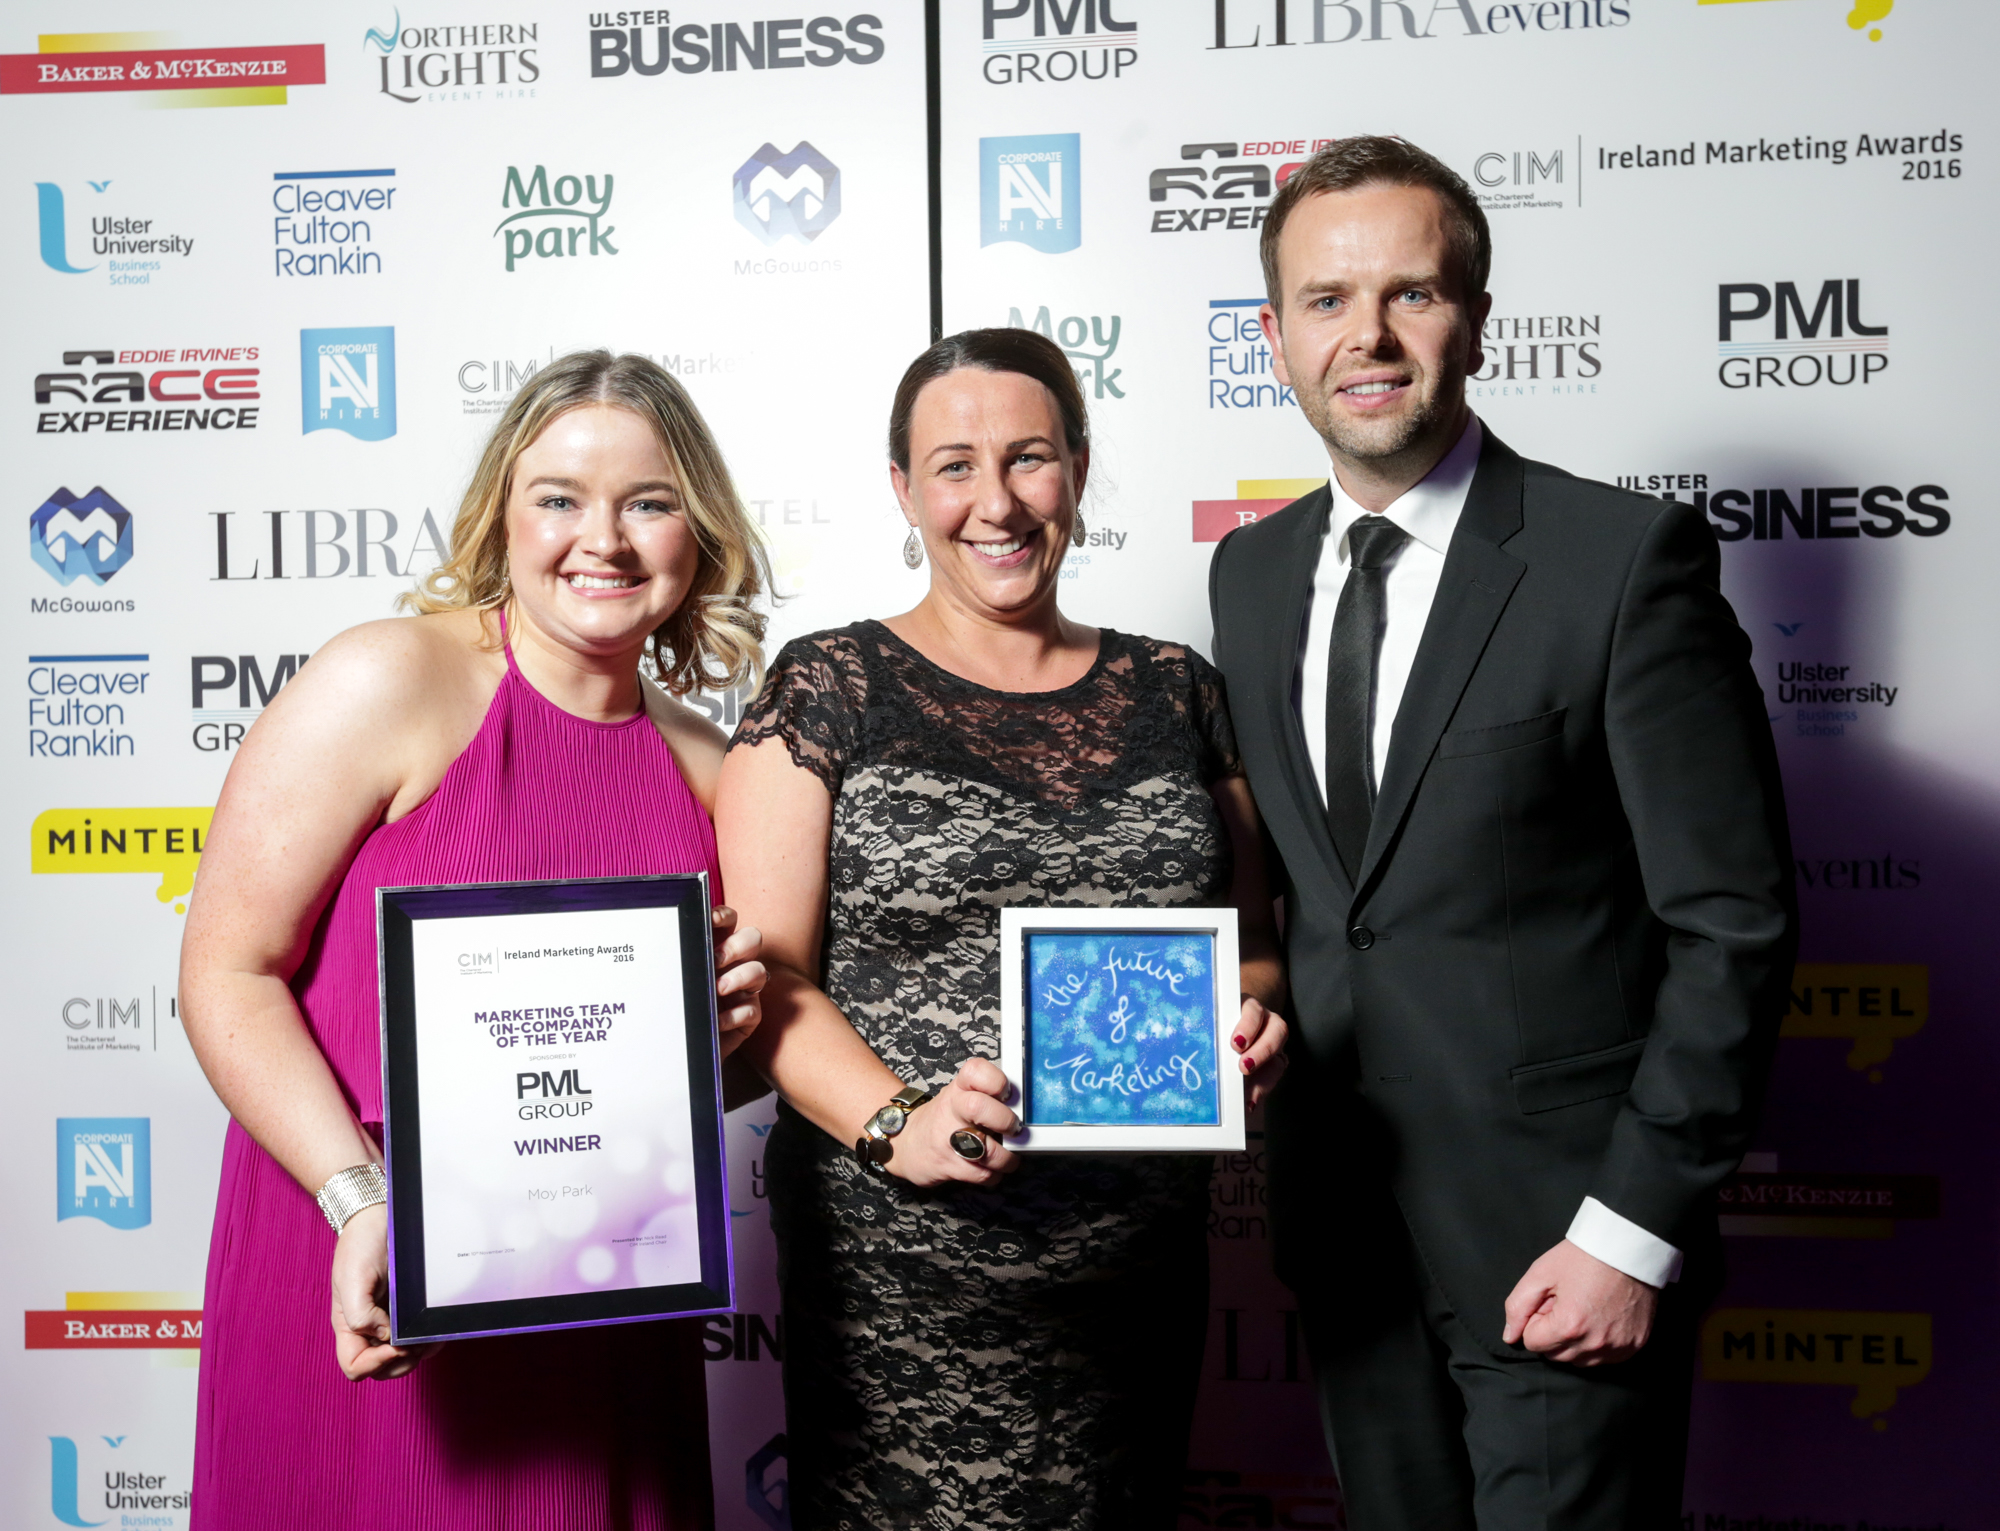 Food Companies Cook Up Success at Chartered Marketing Awards